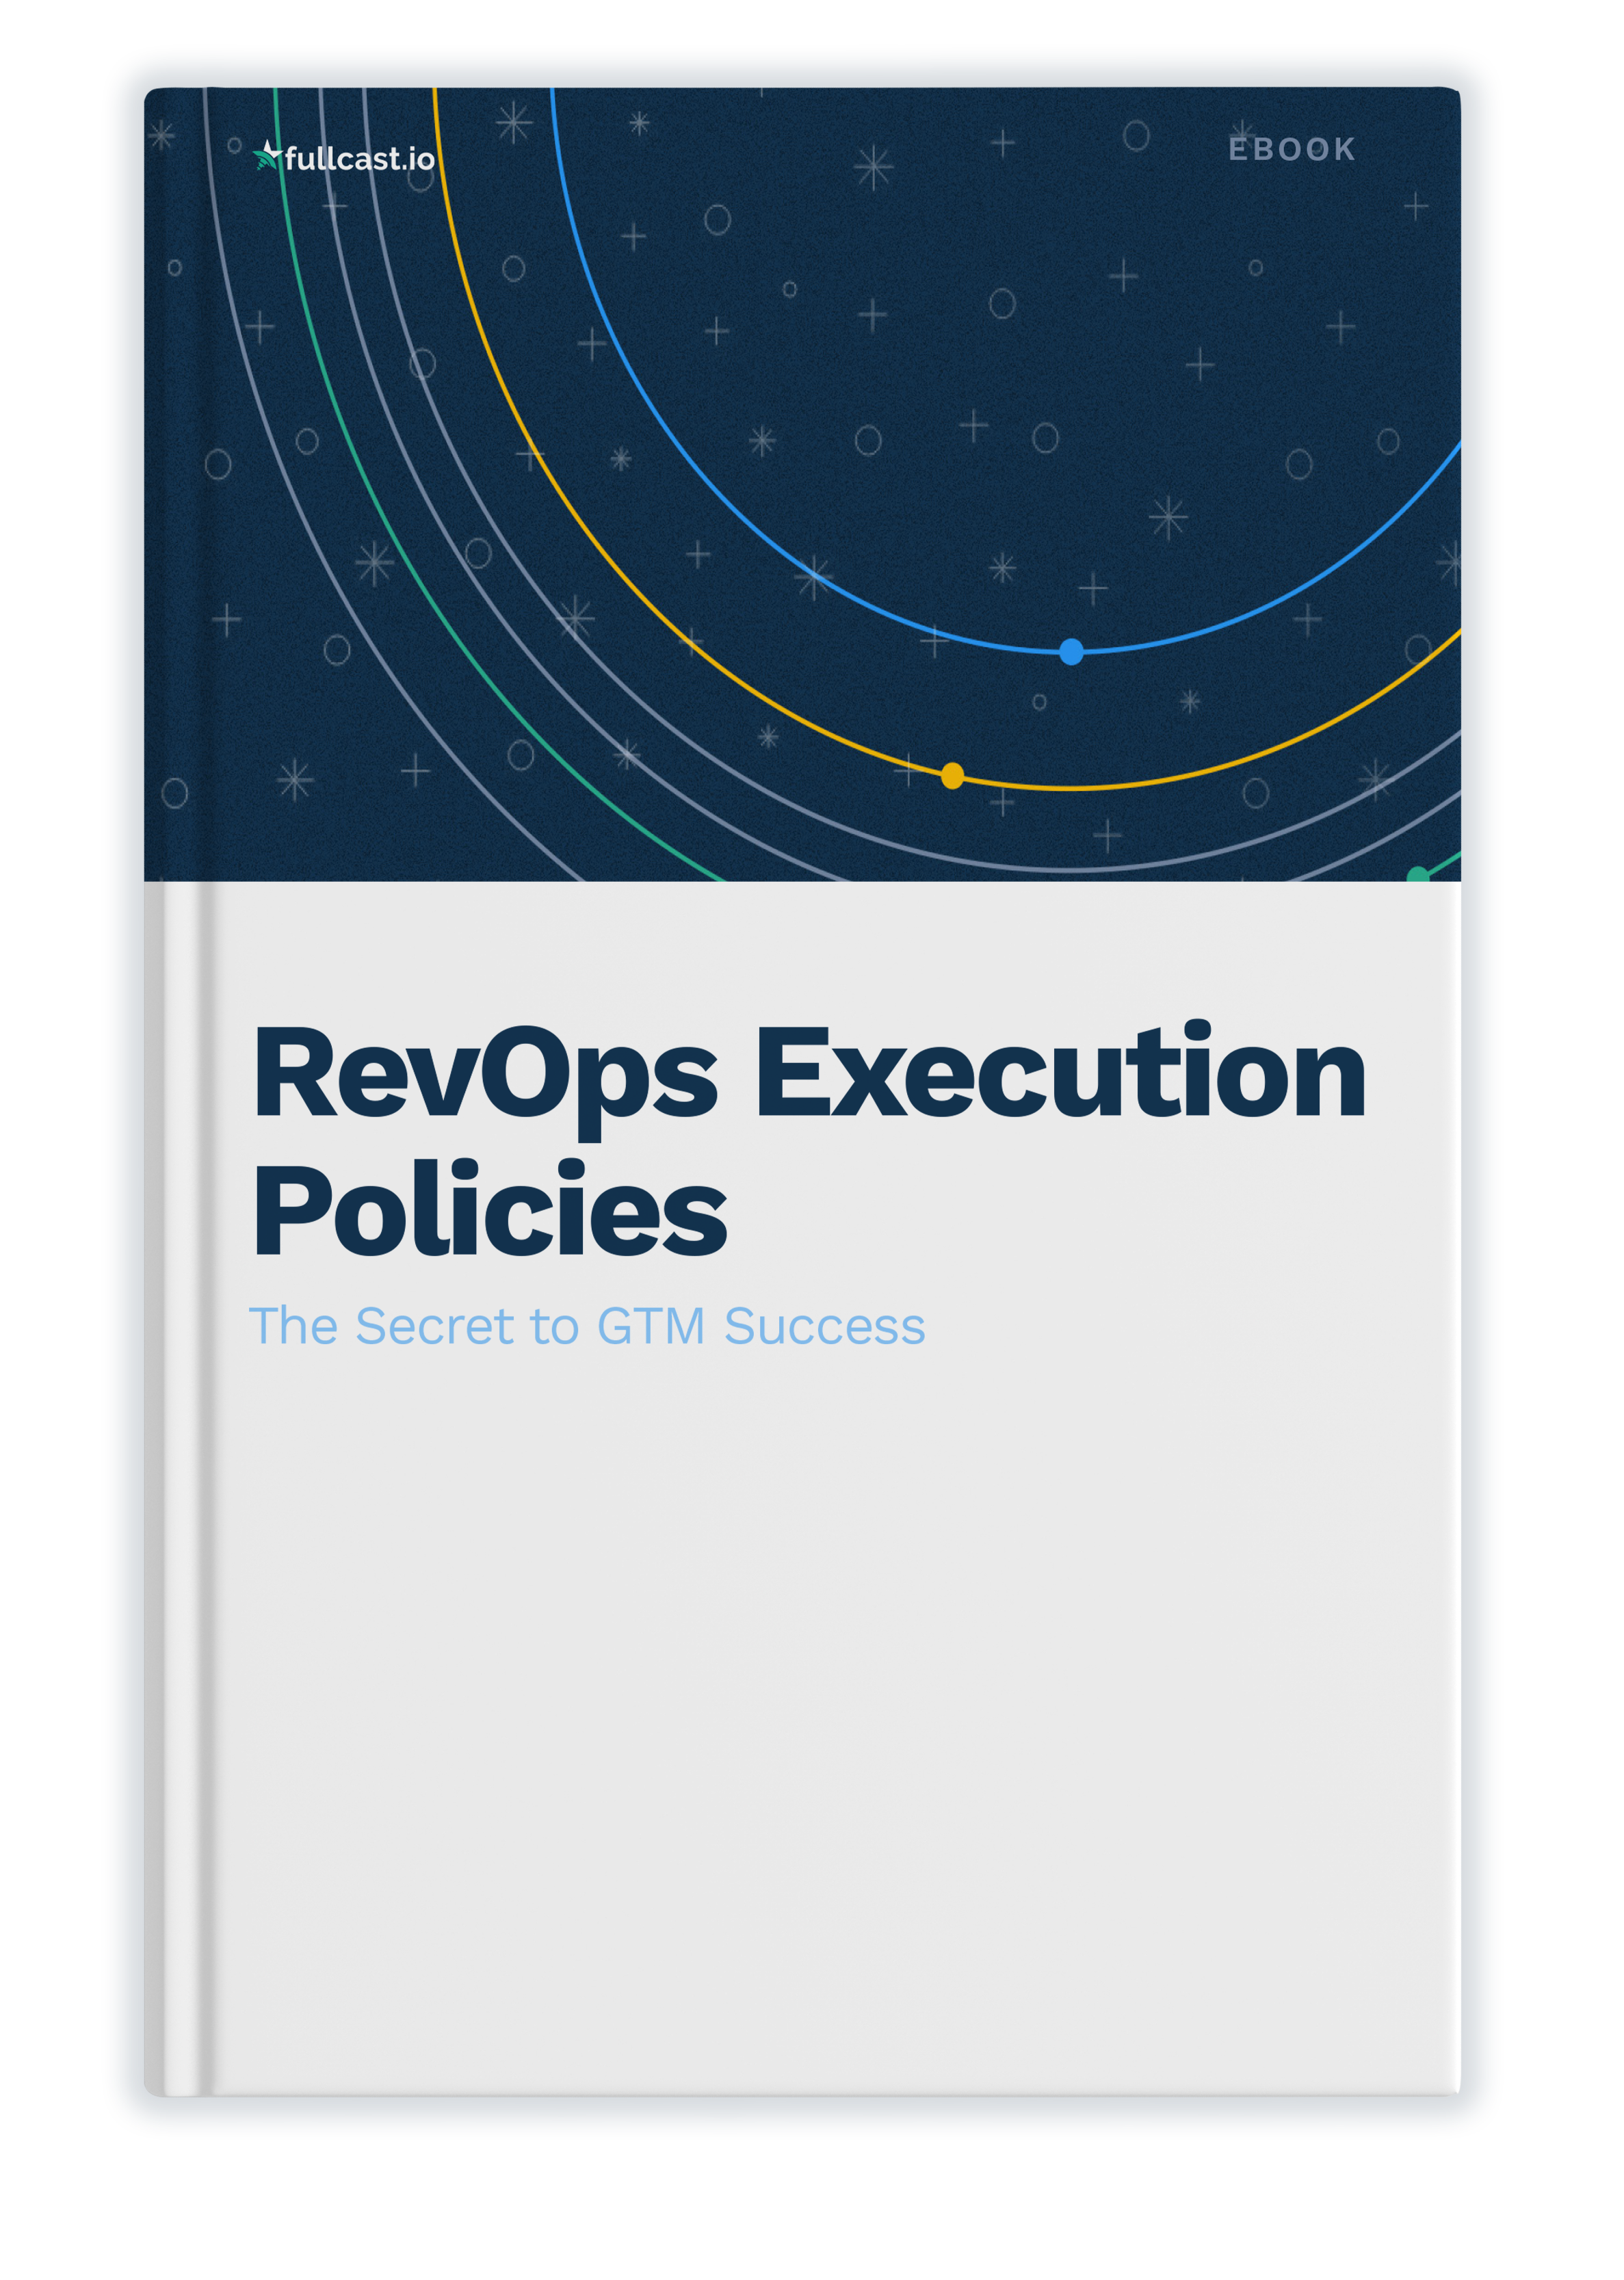 Landing-Page_RevOps-Execution-Policies_Journal-Cover_12Apr22_v2